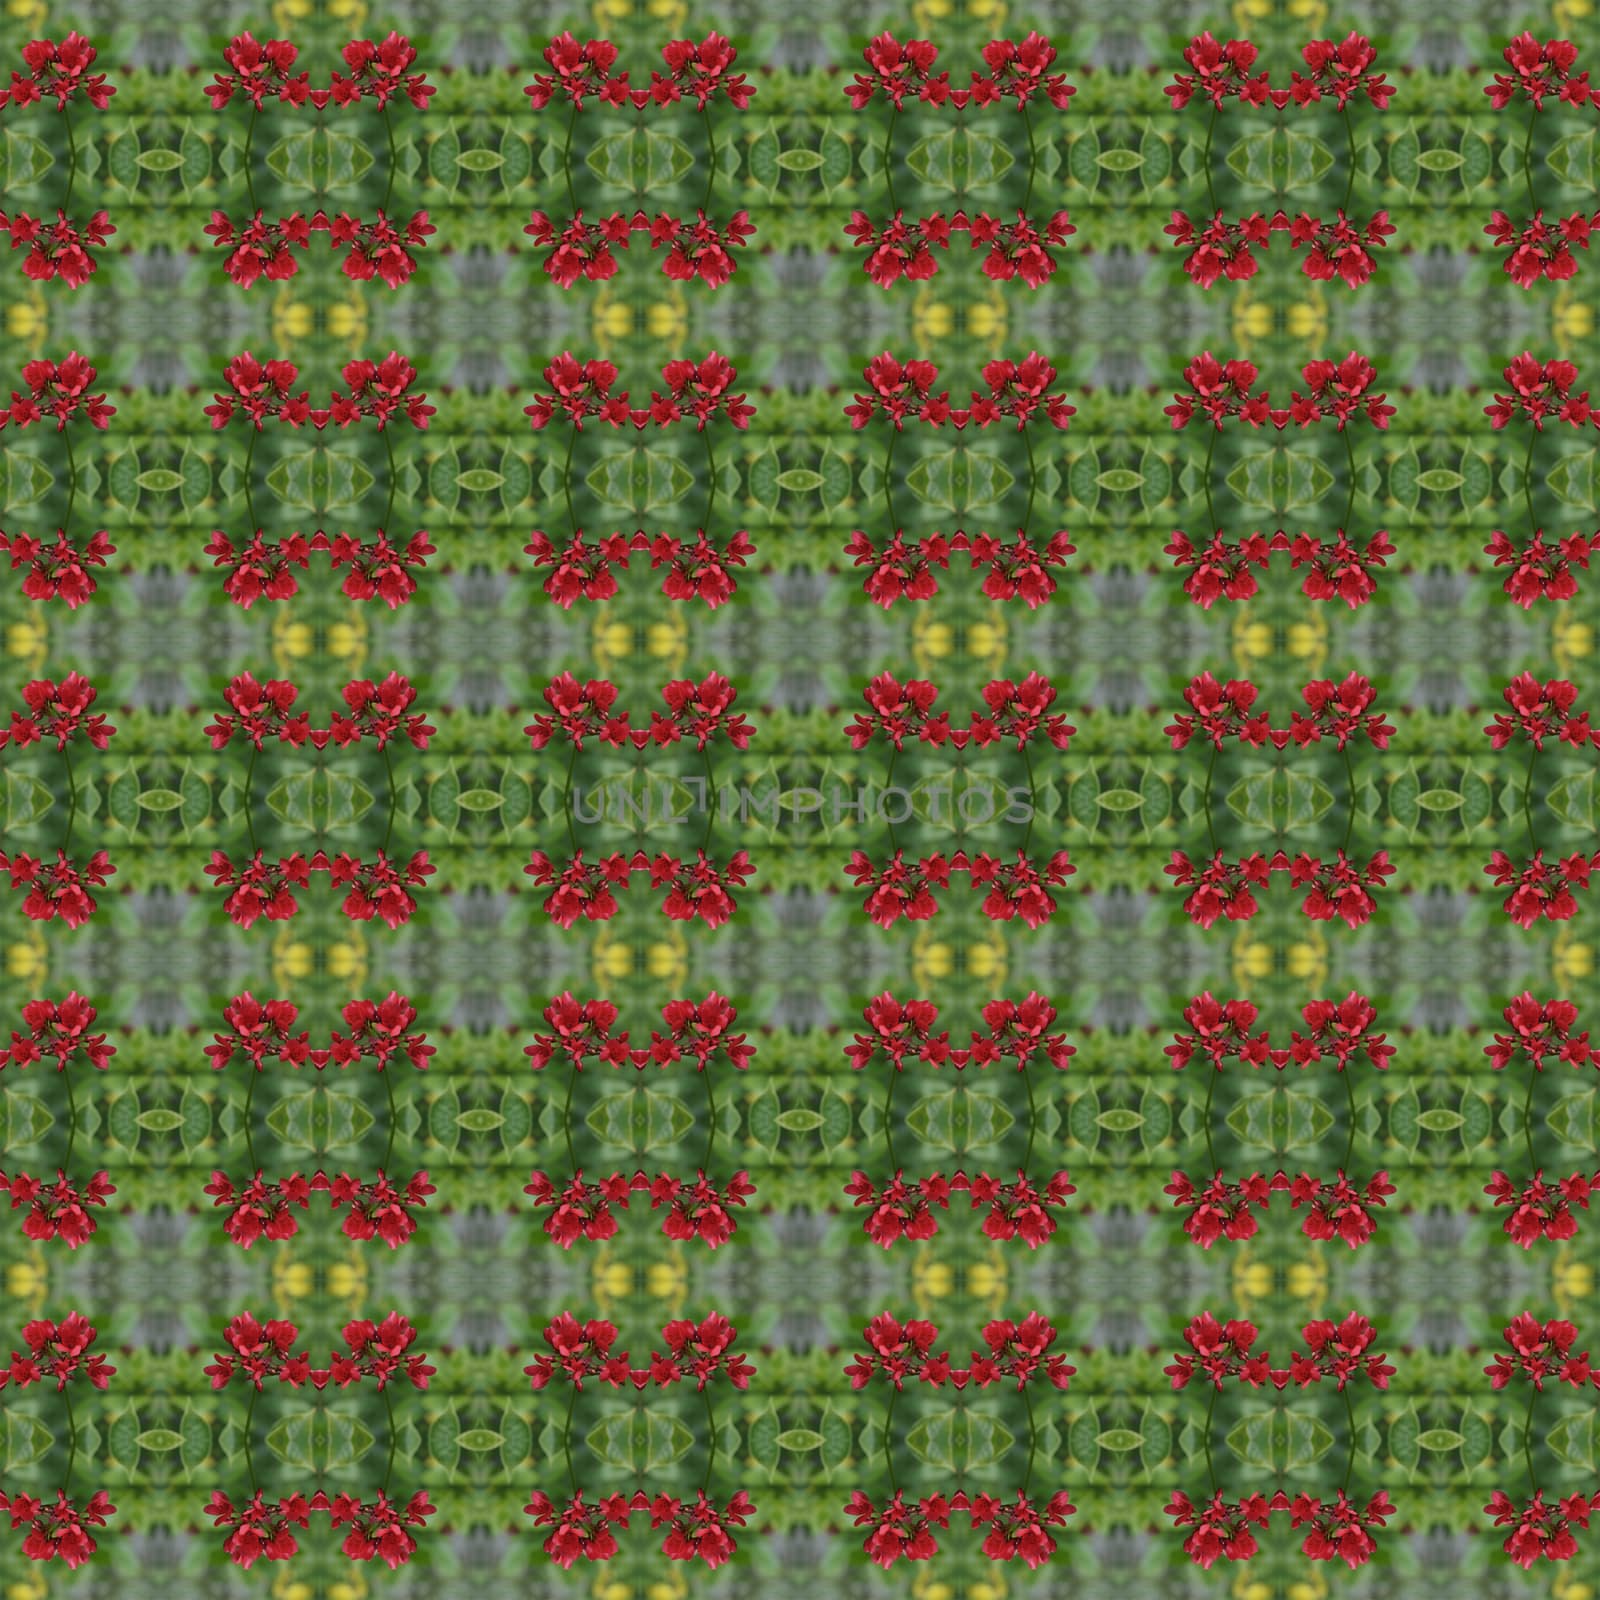 Small flowers with a bouquet of red flowers in full bloom seamless use as pattern and wallpaper.